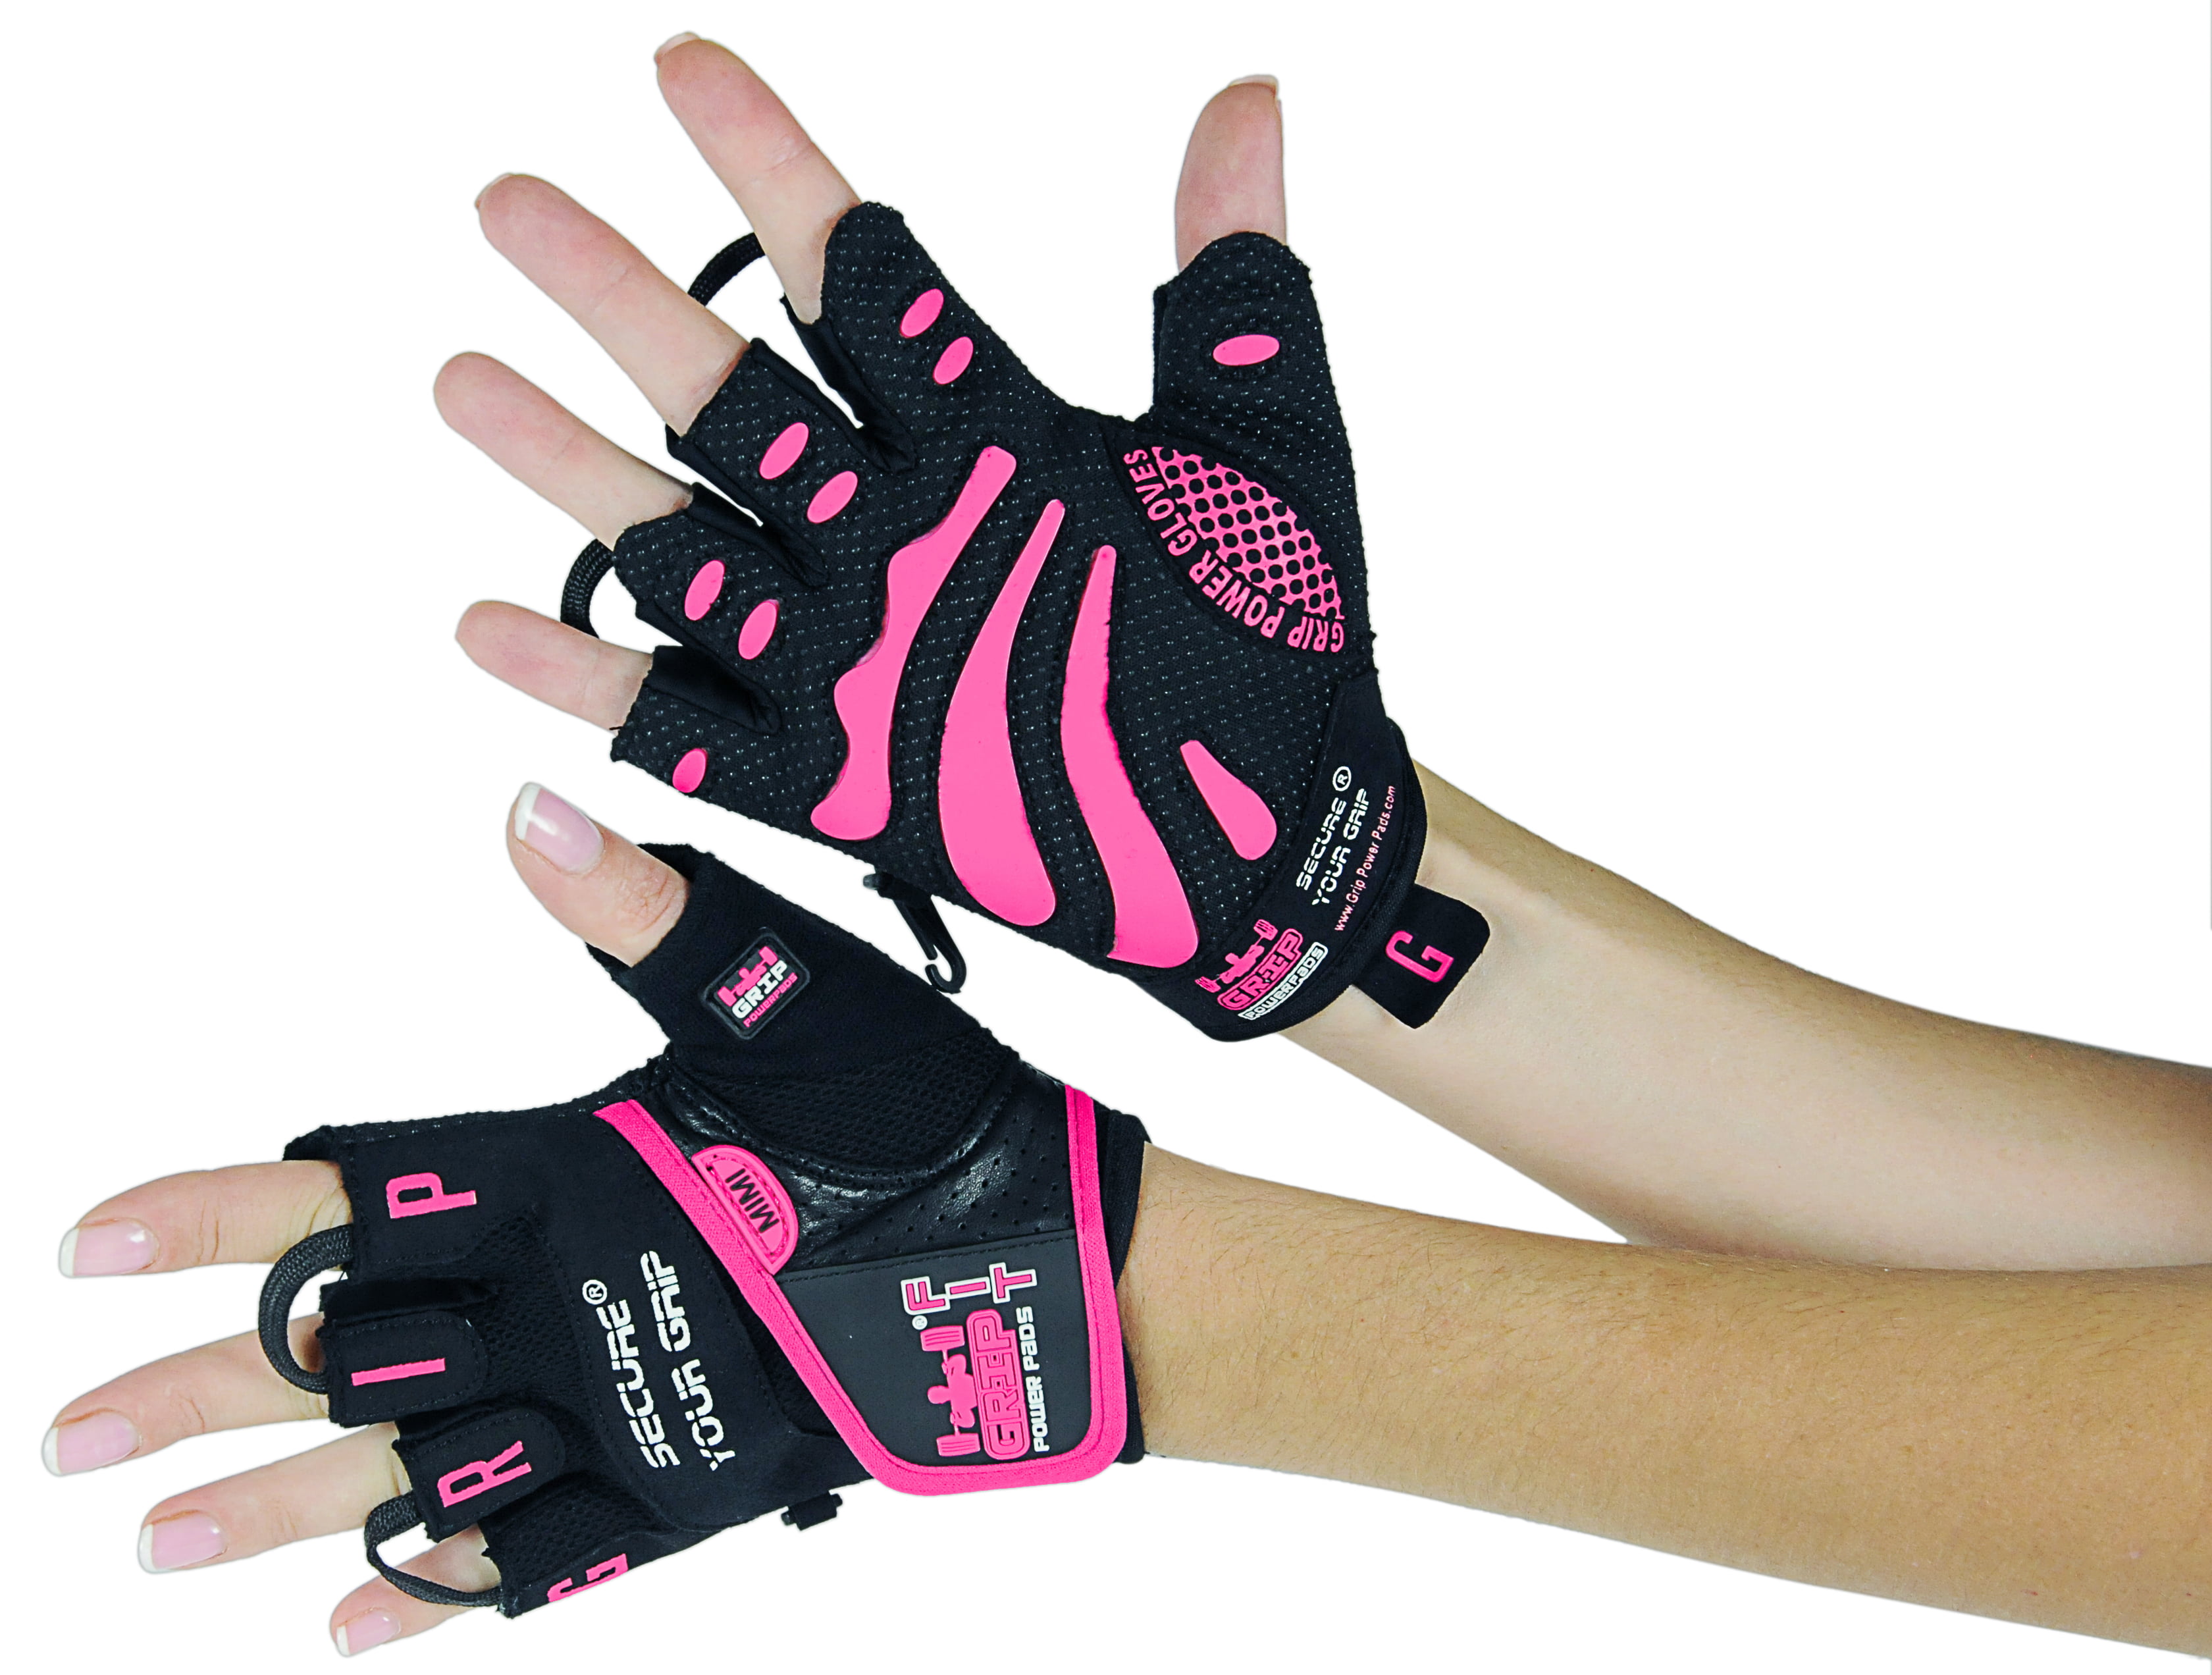 Women Gym Gloves Mimi Protect Your Hands & Improve Your Grip Pink & Black Weightlifting Gloves Easy to Pull On & Off Adjustable Fit 